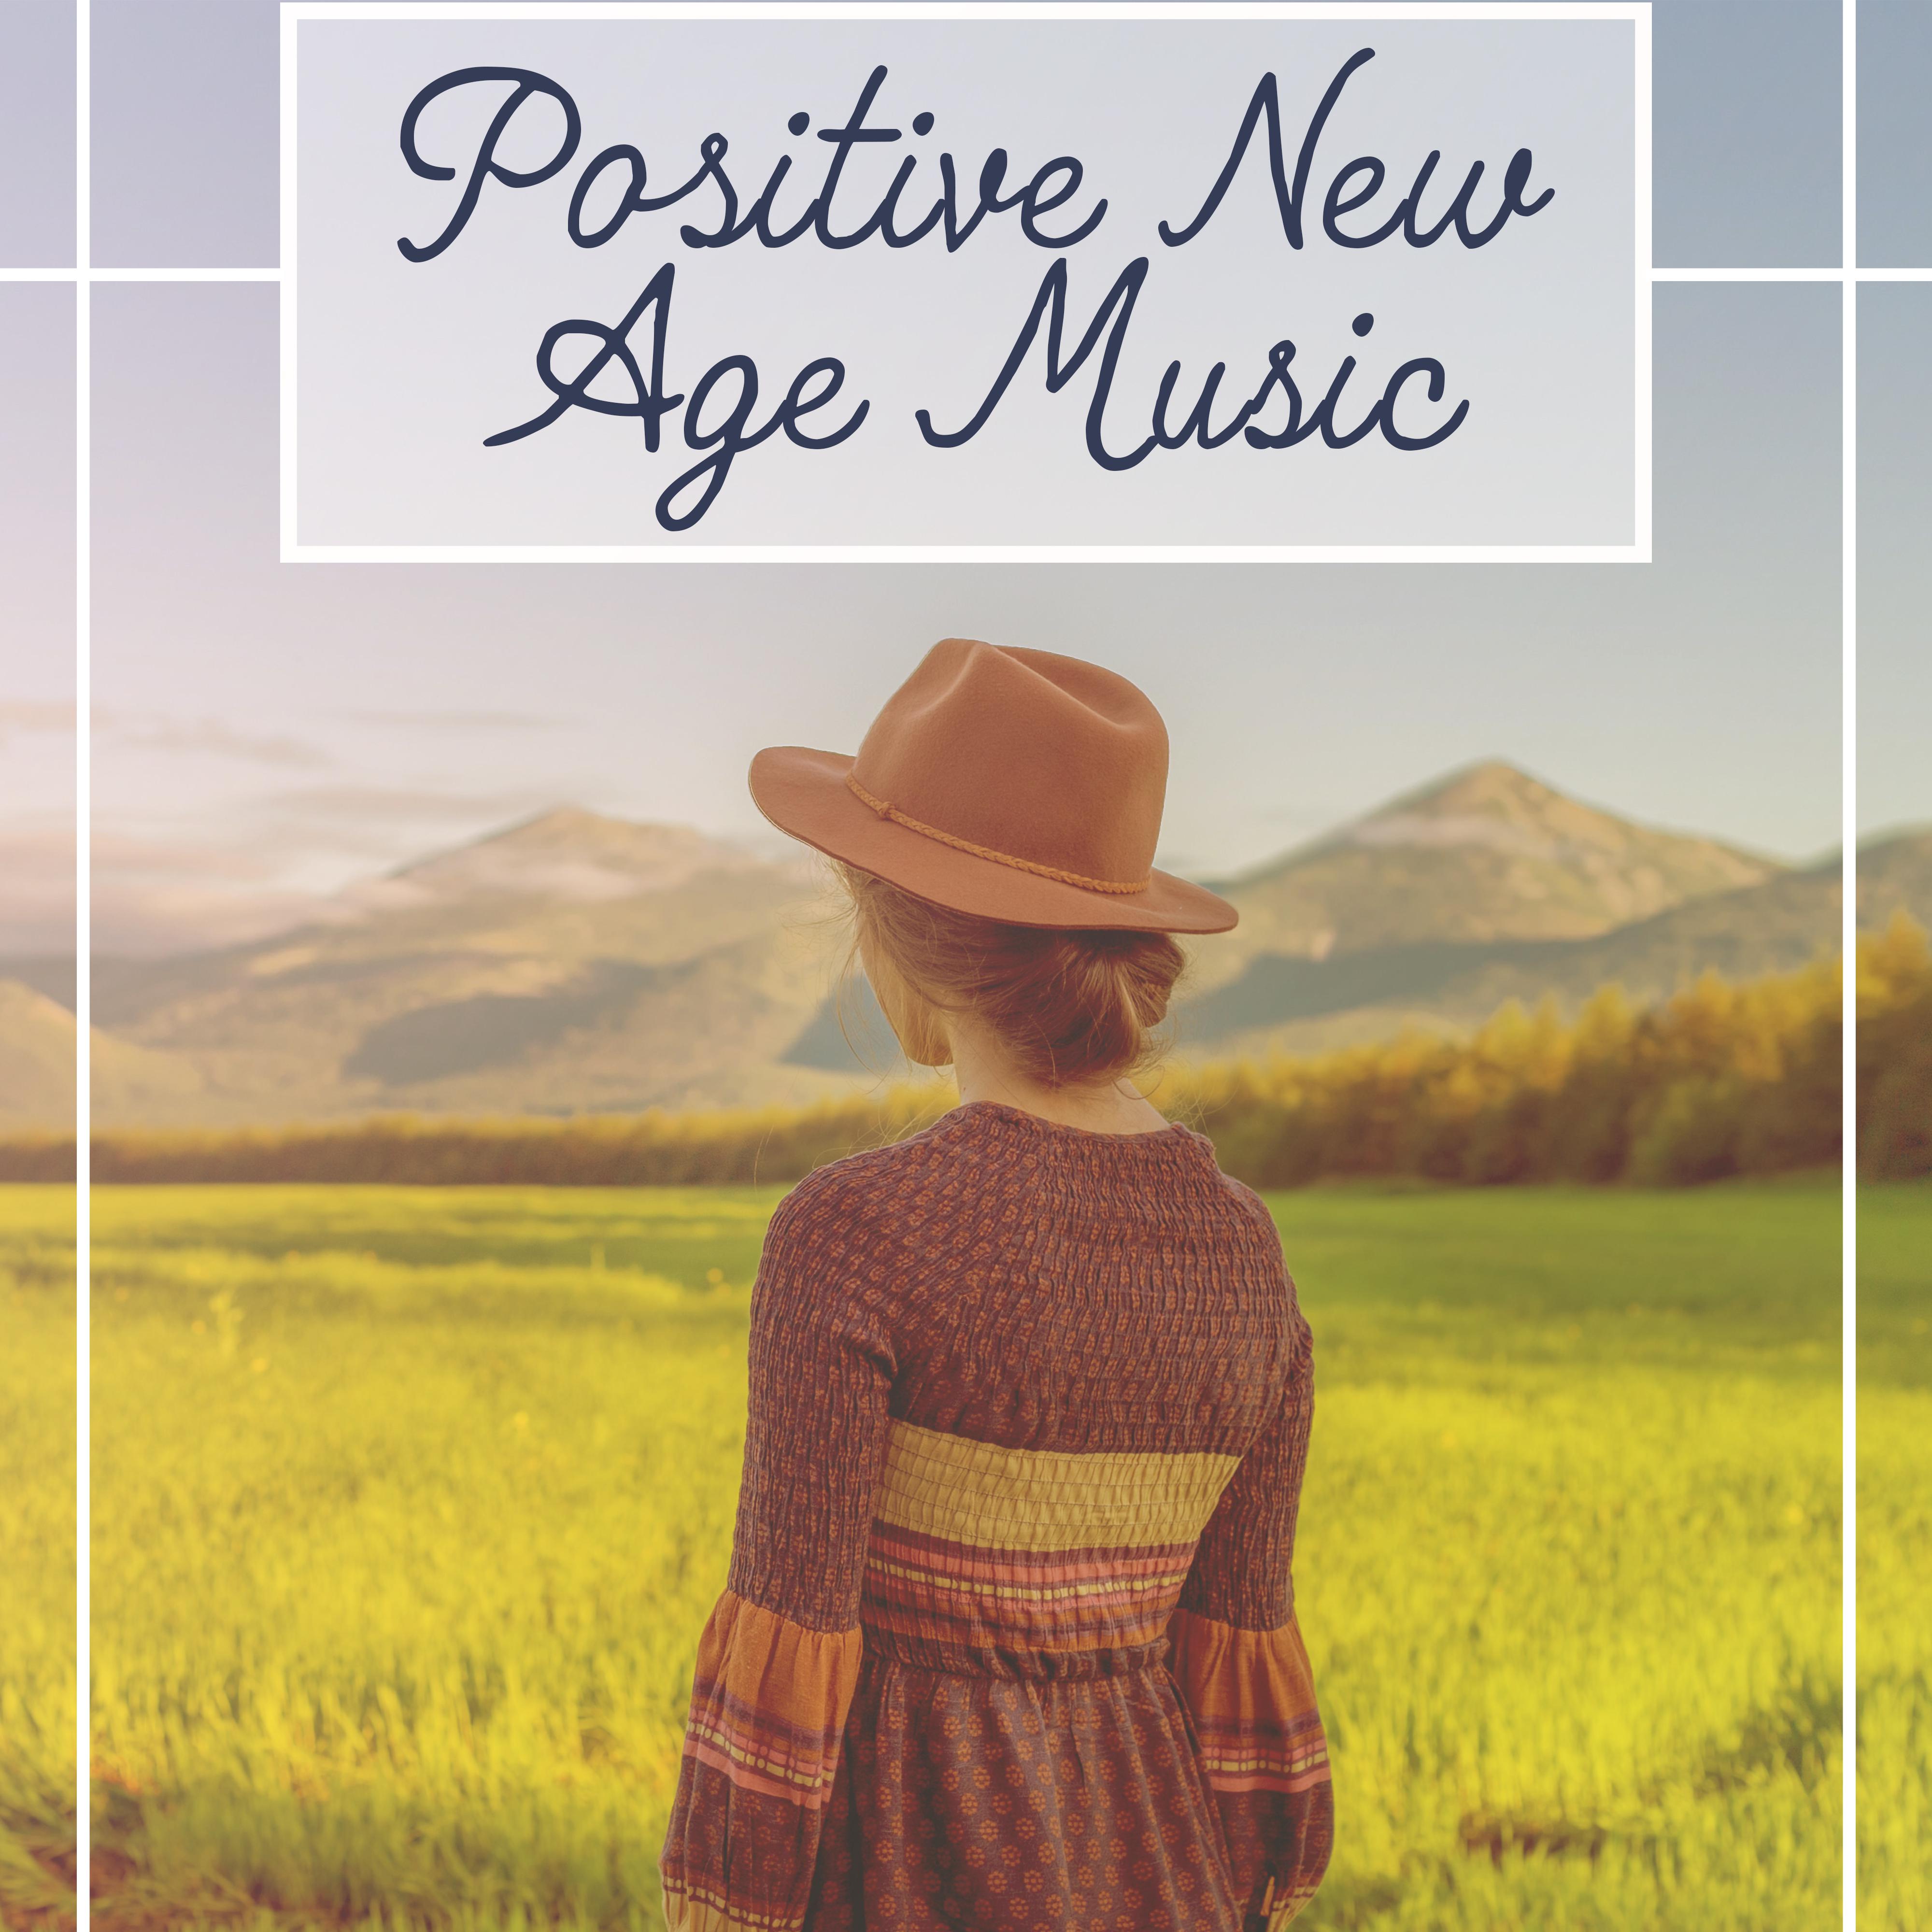 Positive New Age Music  Soft Music to Relax, Peaceful Music, Stress Relief, Chilled Sounds